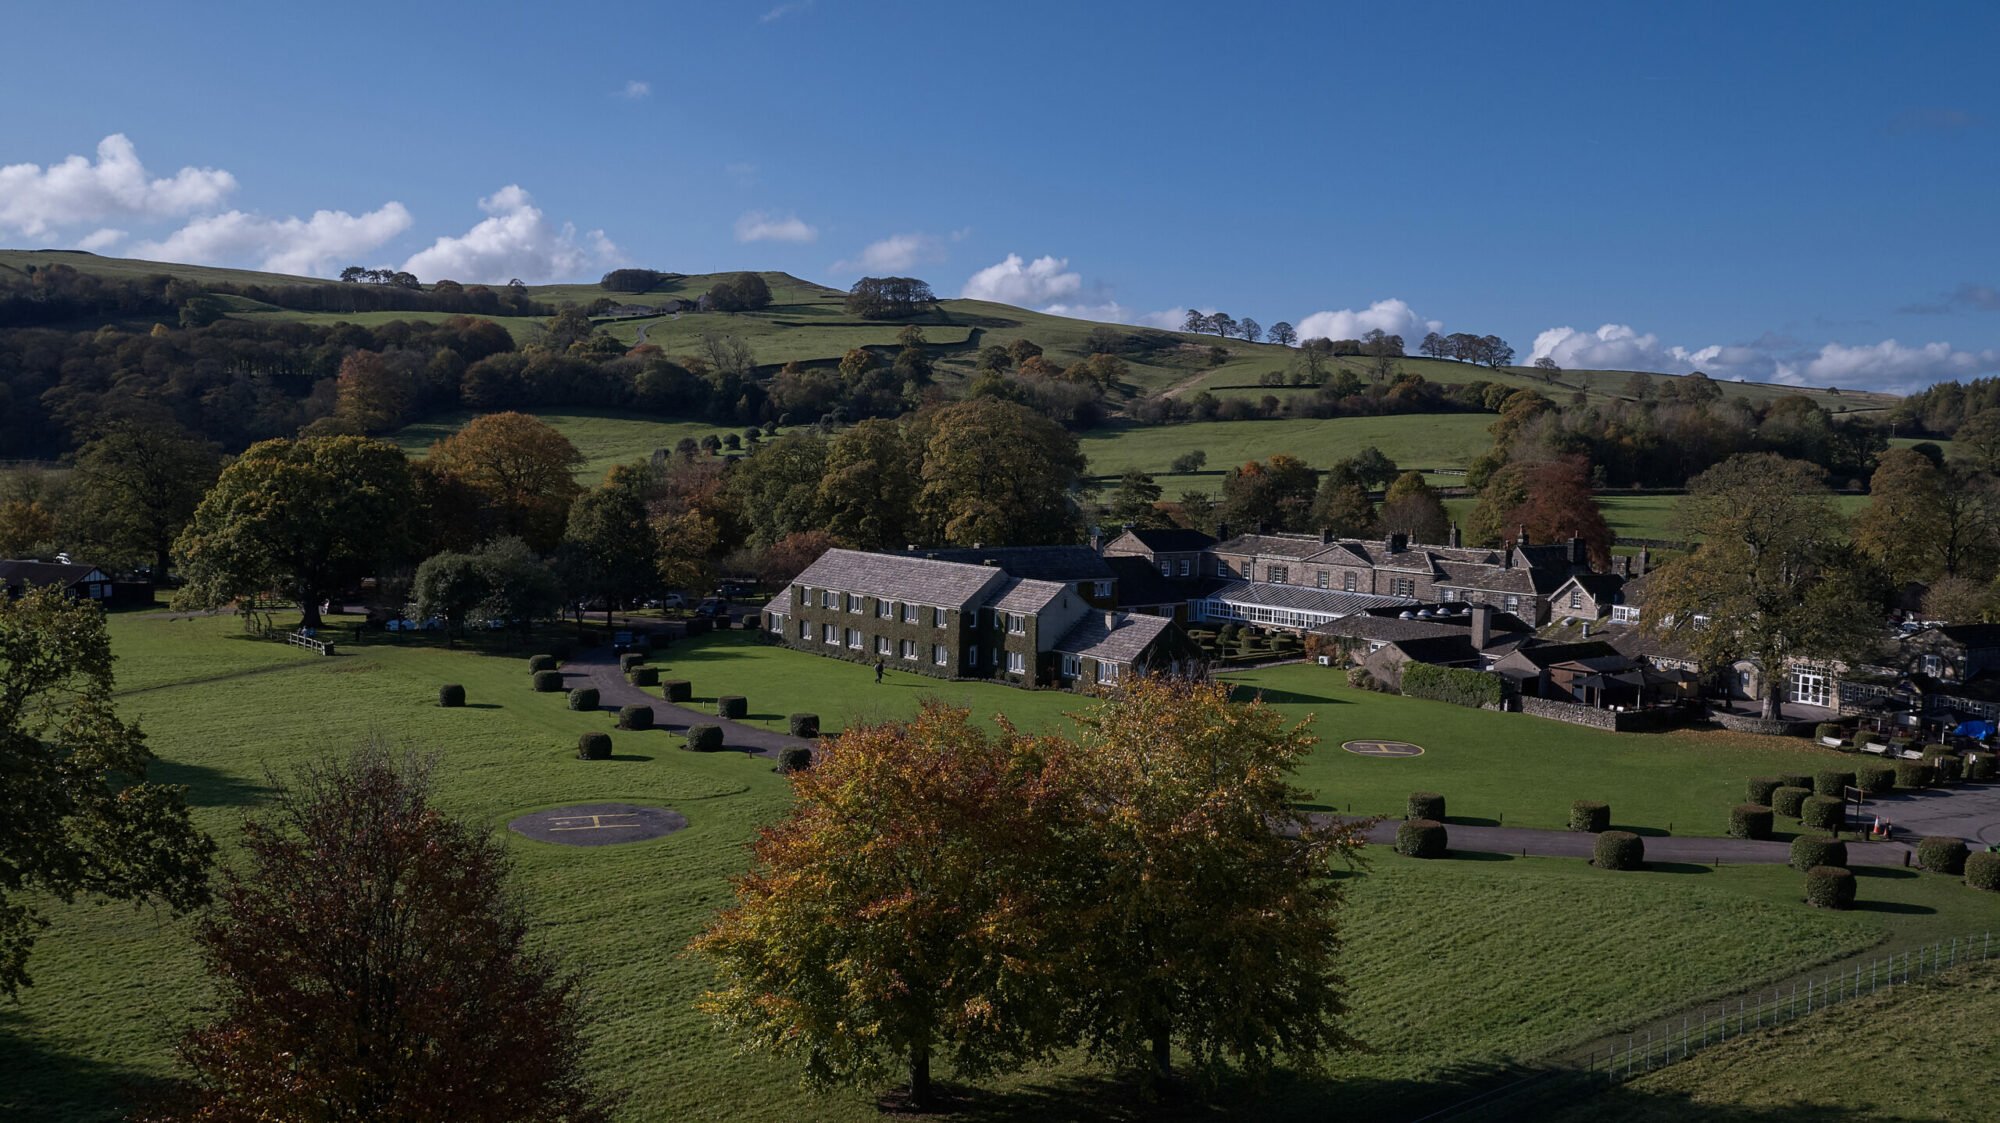 Image name The Devonshire Arms Hotel Spa ariel view summer view autumn view Yorkshire Dales Bolton Abbey Wedding venue countryside 2 1 scaled the 1 image from the post The Devonshire Arms Hotel & Spa in Yorkshire.com.